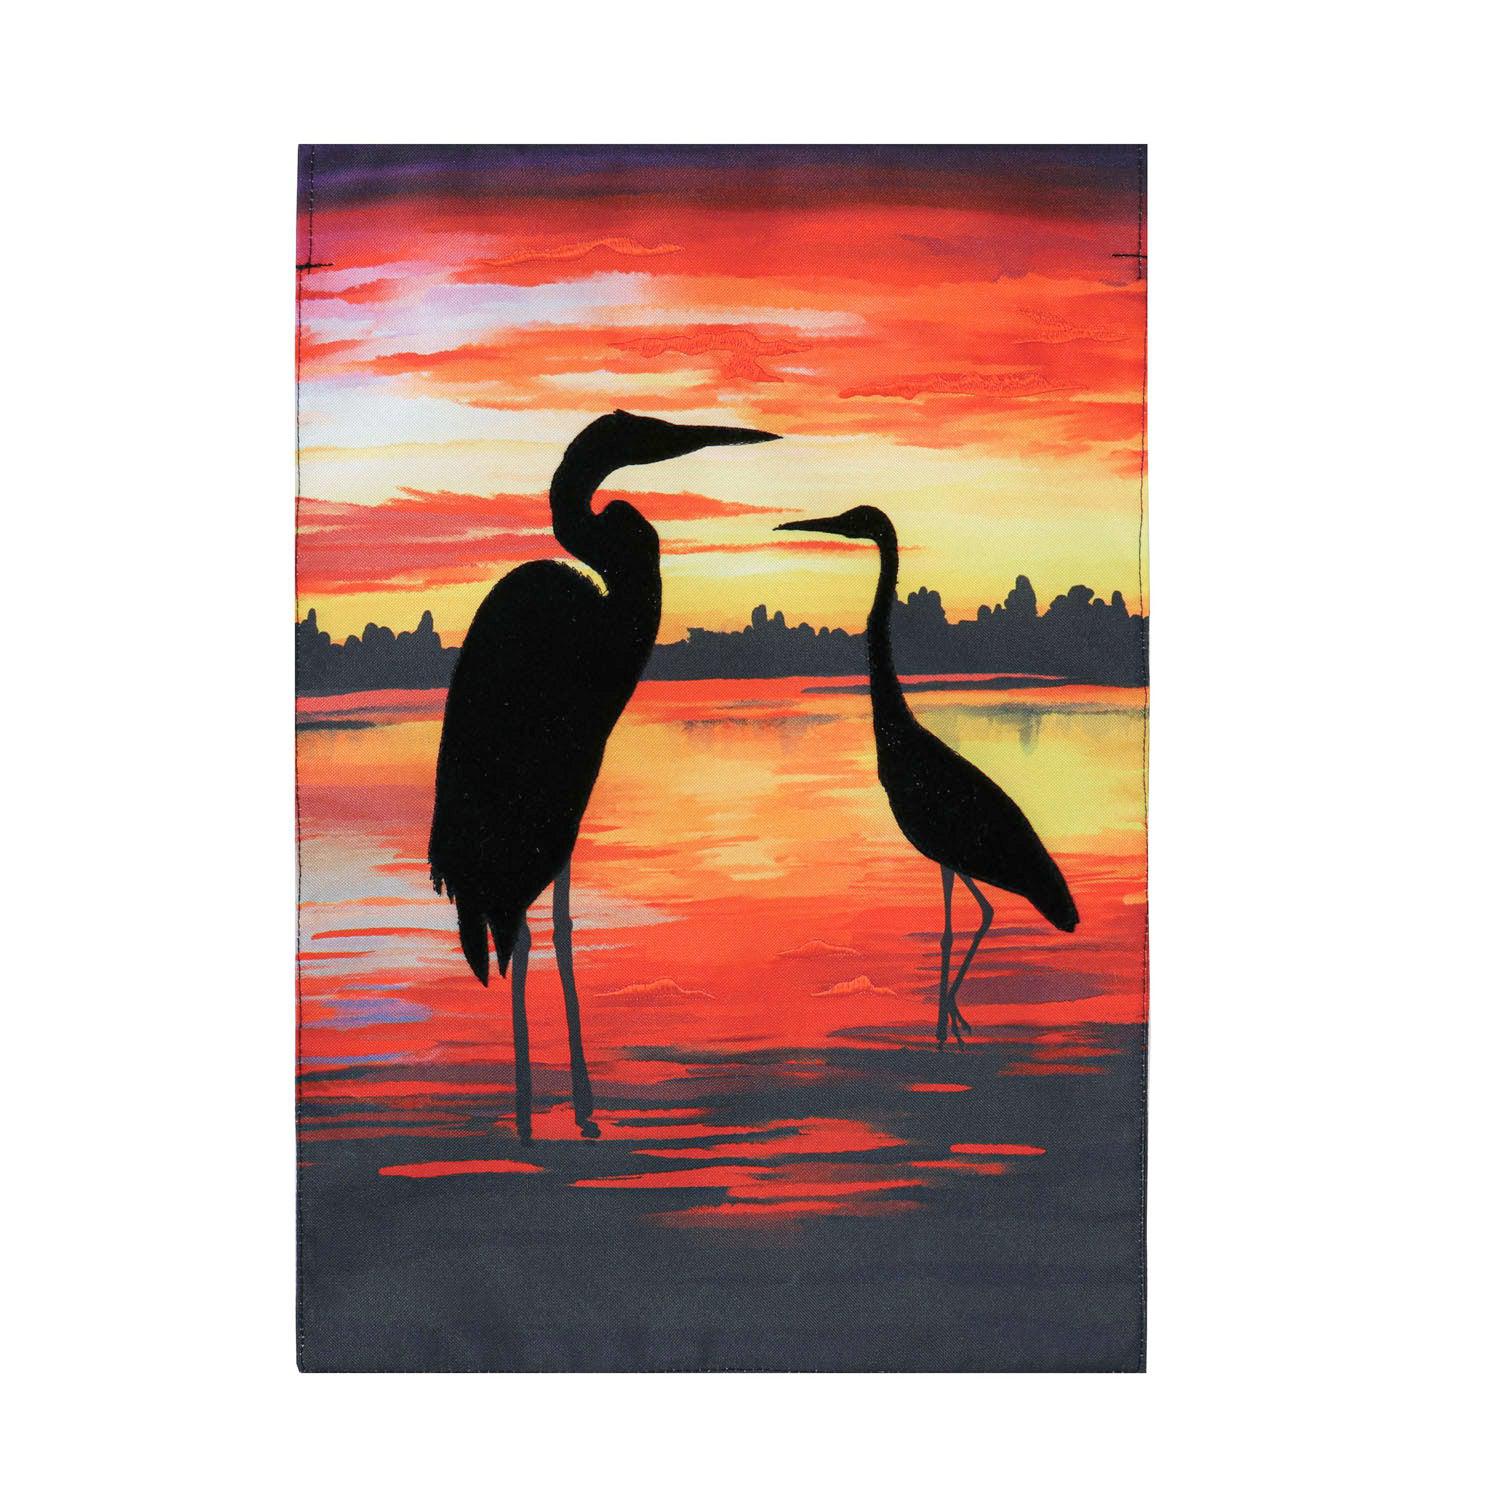 The Sunset Silhouette garden flag features a pair of cranes silhouetted against a beautiful sunset.